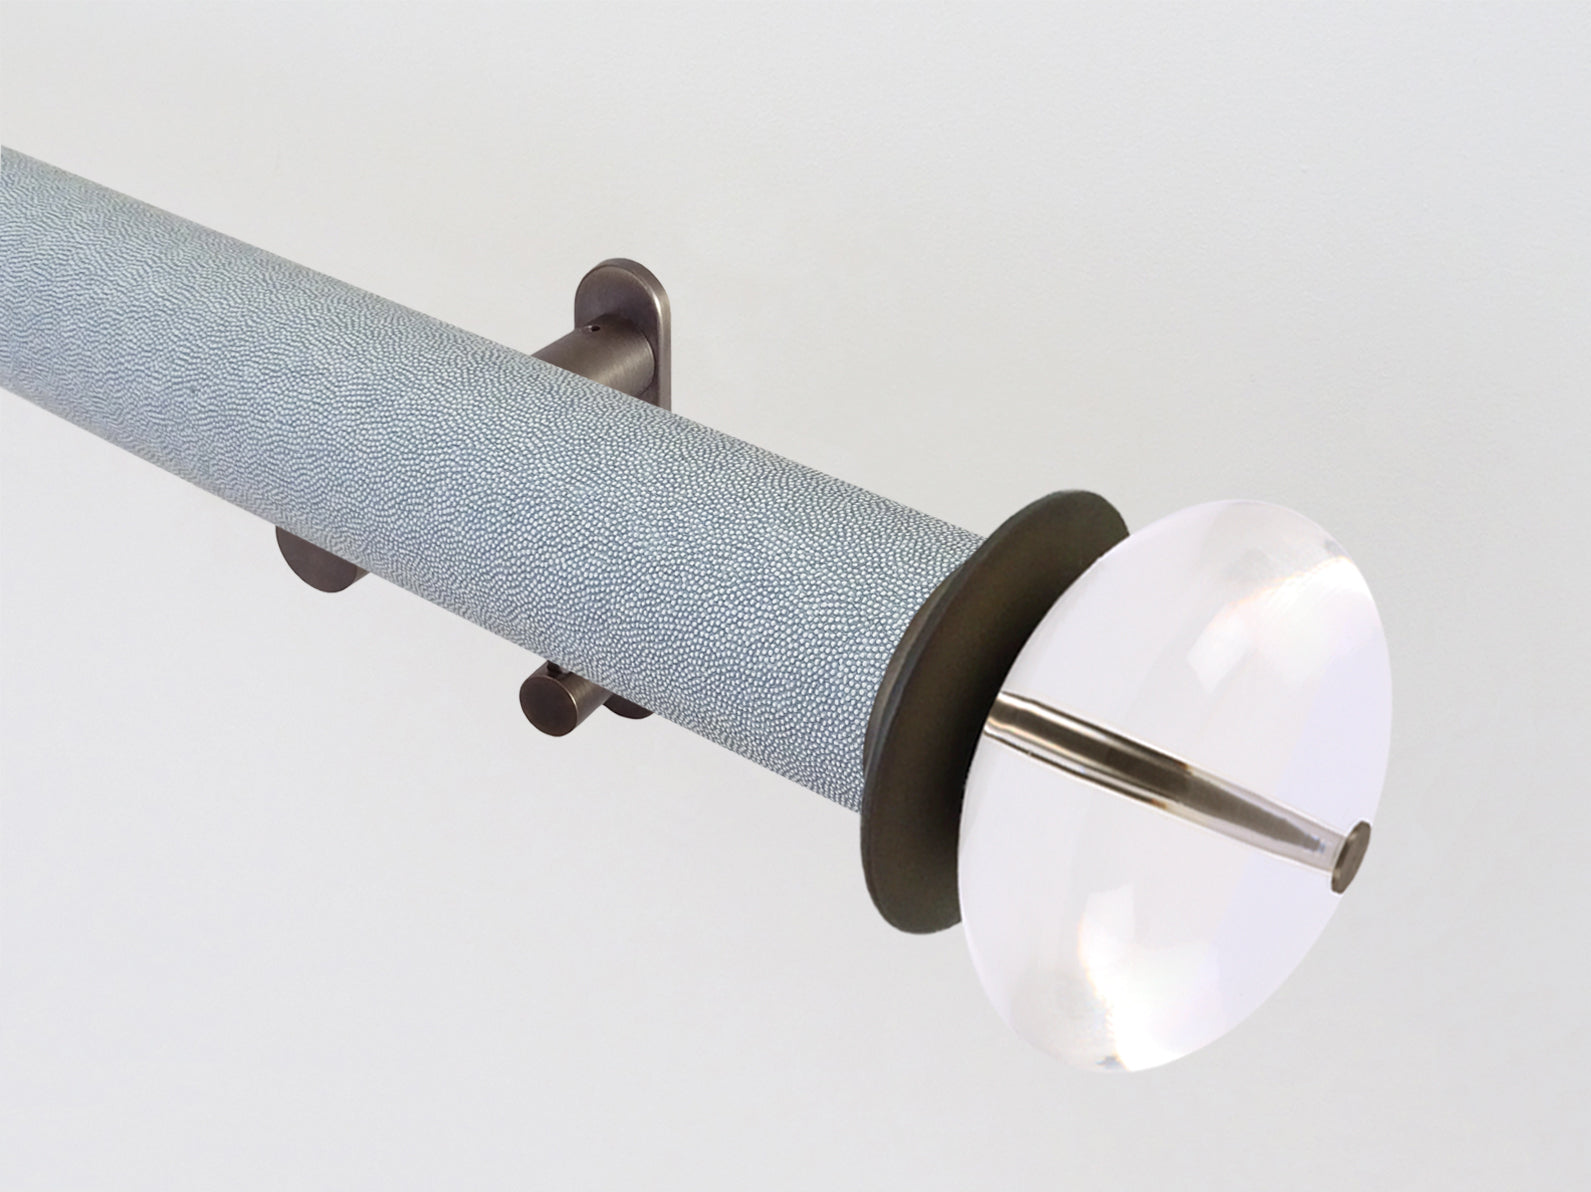 50mm diameter wrapped and tracked shagreen moonlight pole with acrylic ellipse finials